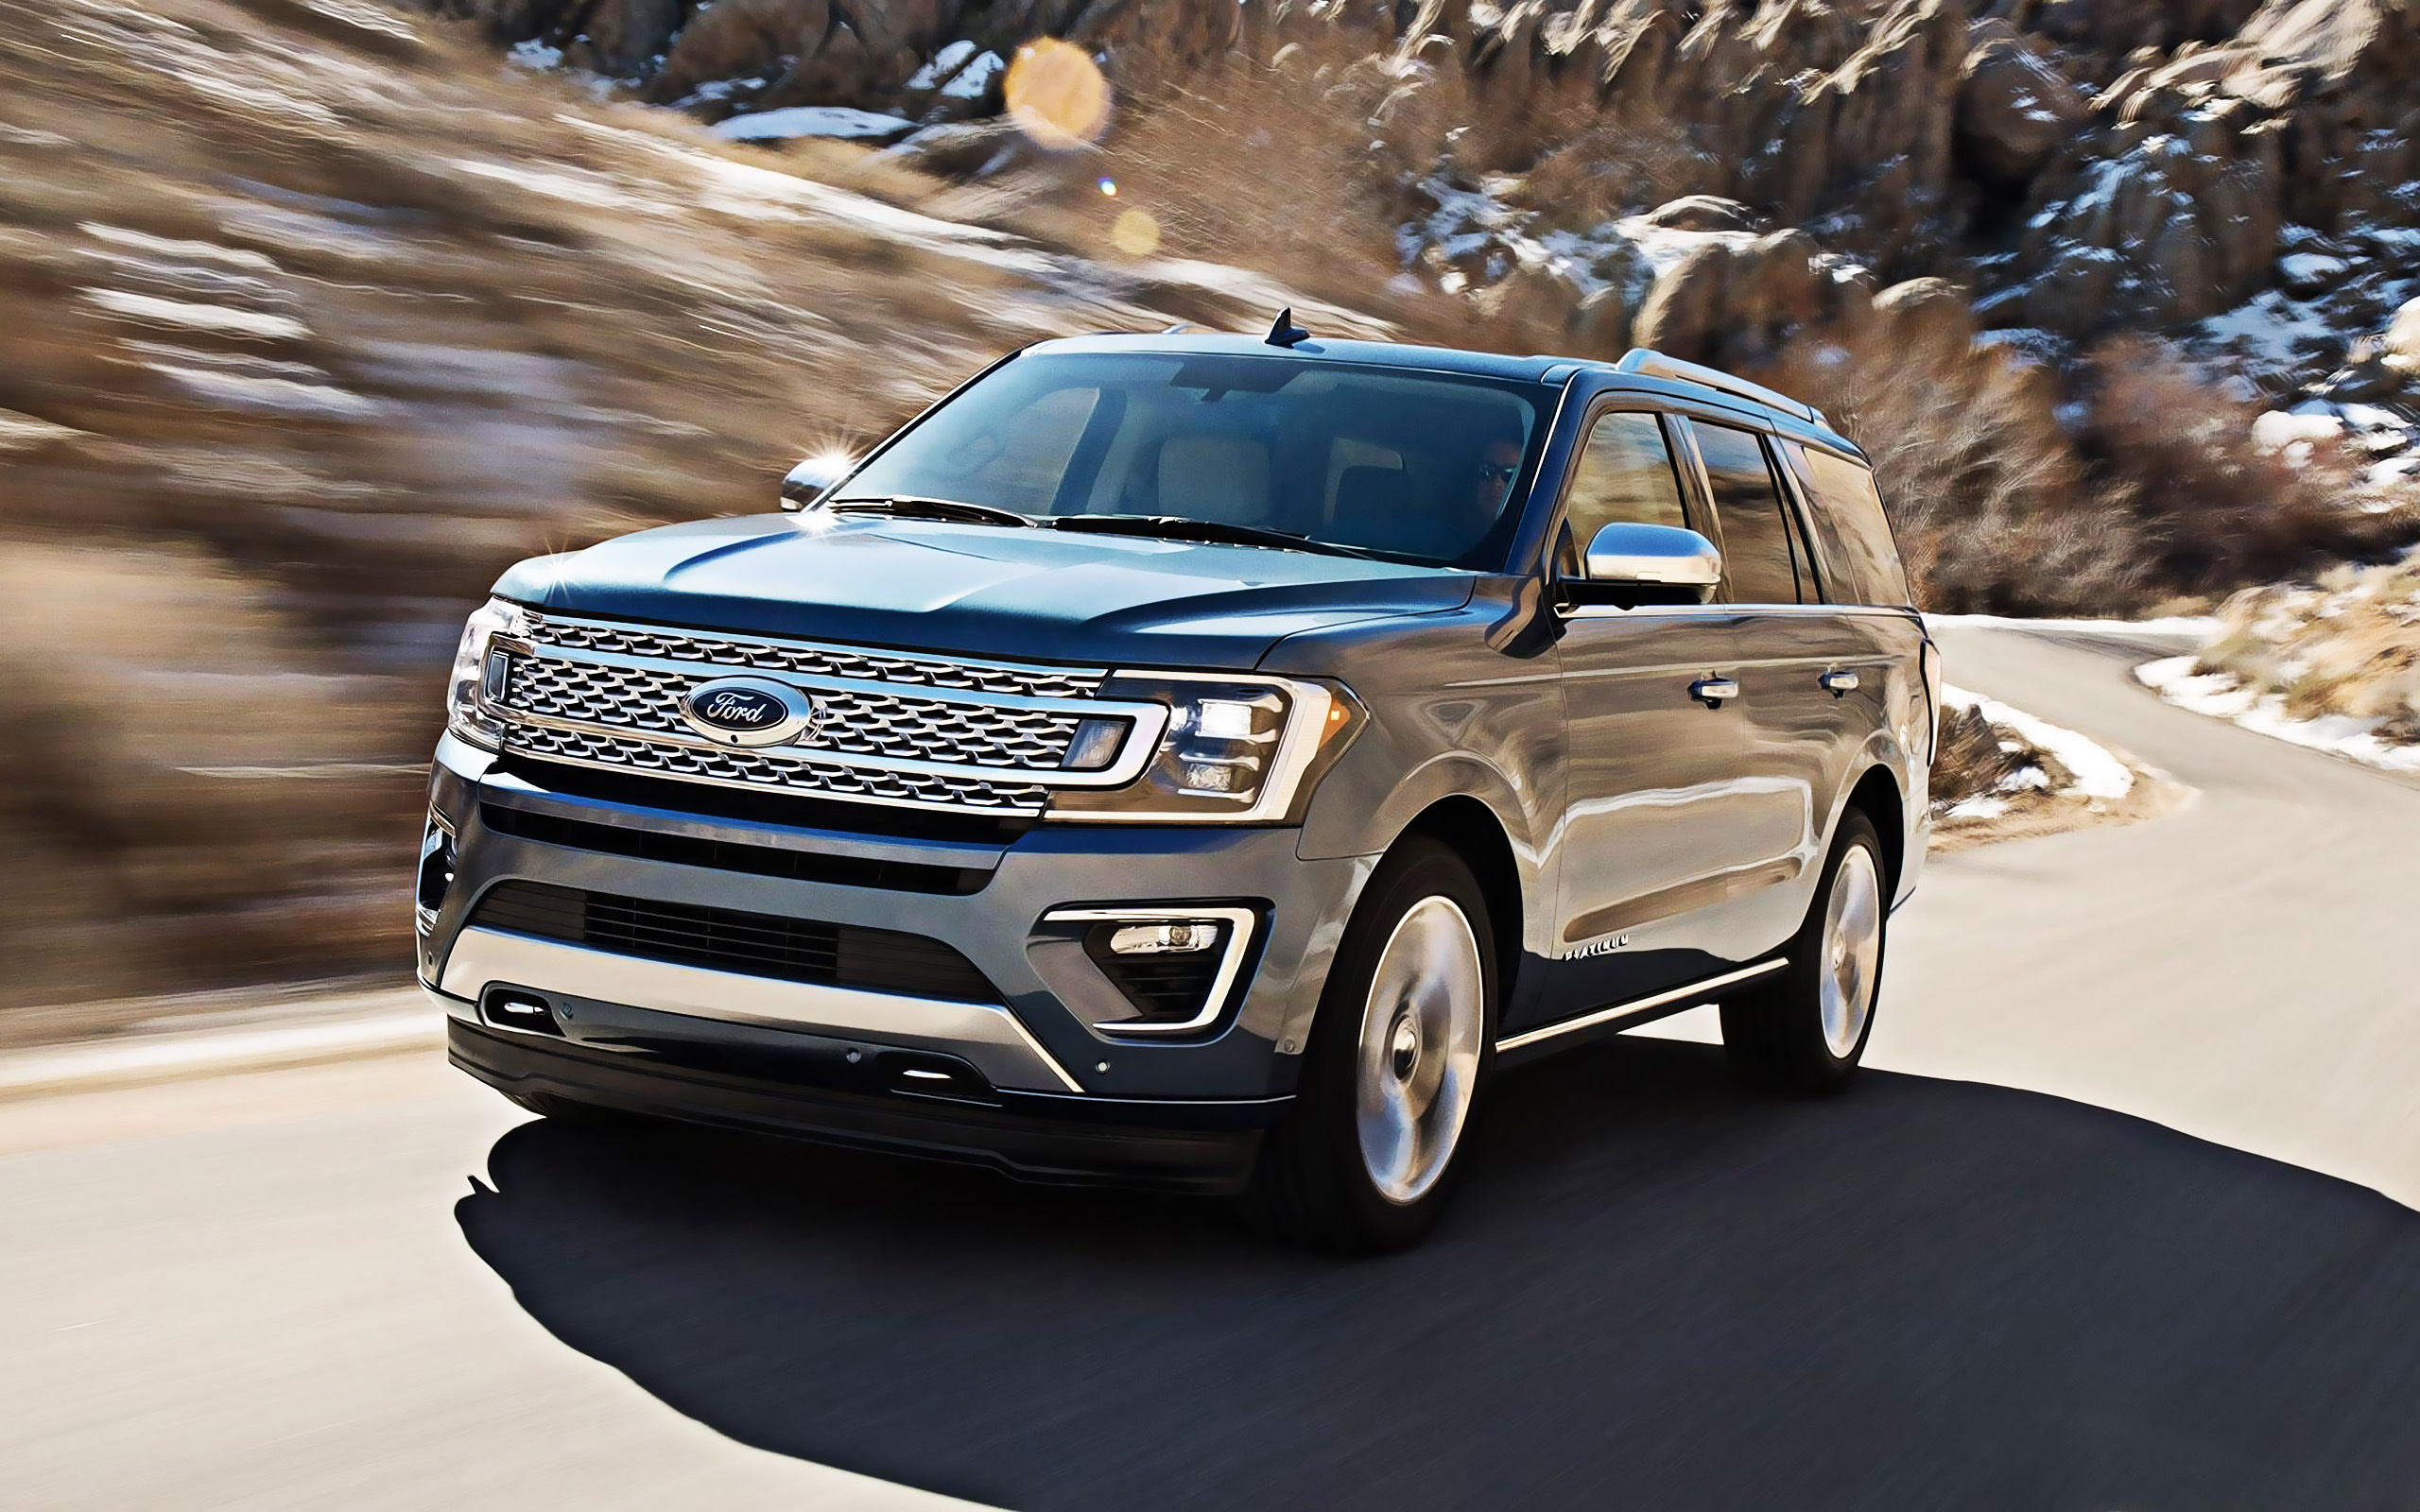 Ford Expedition, Luxury SUV, Gray expedition, High quality, 2560x1600 HD Desktop